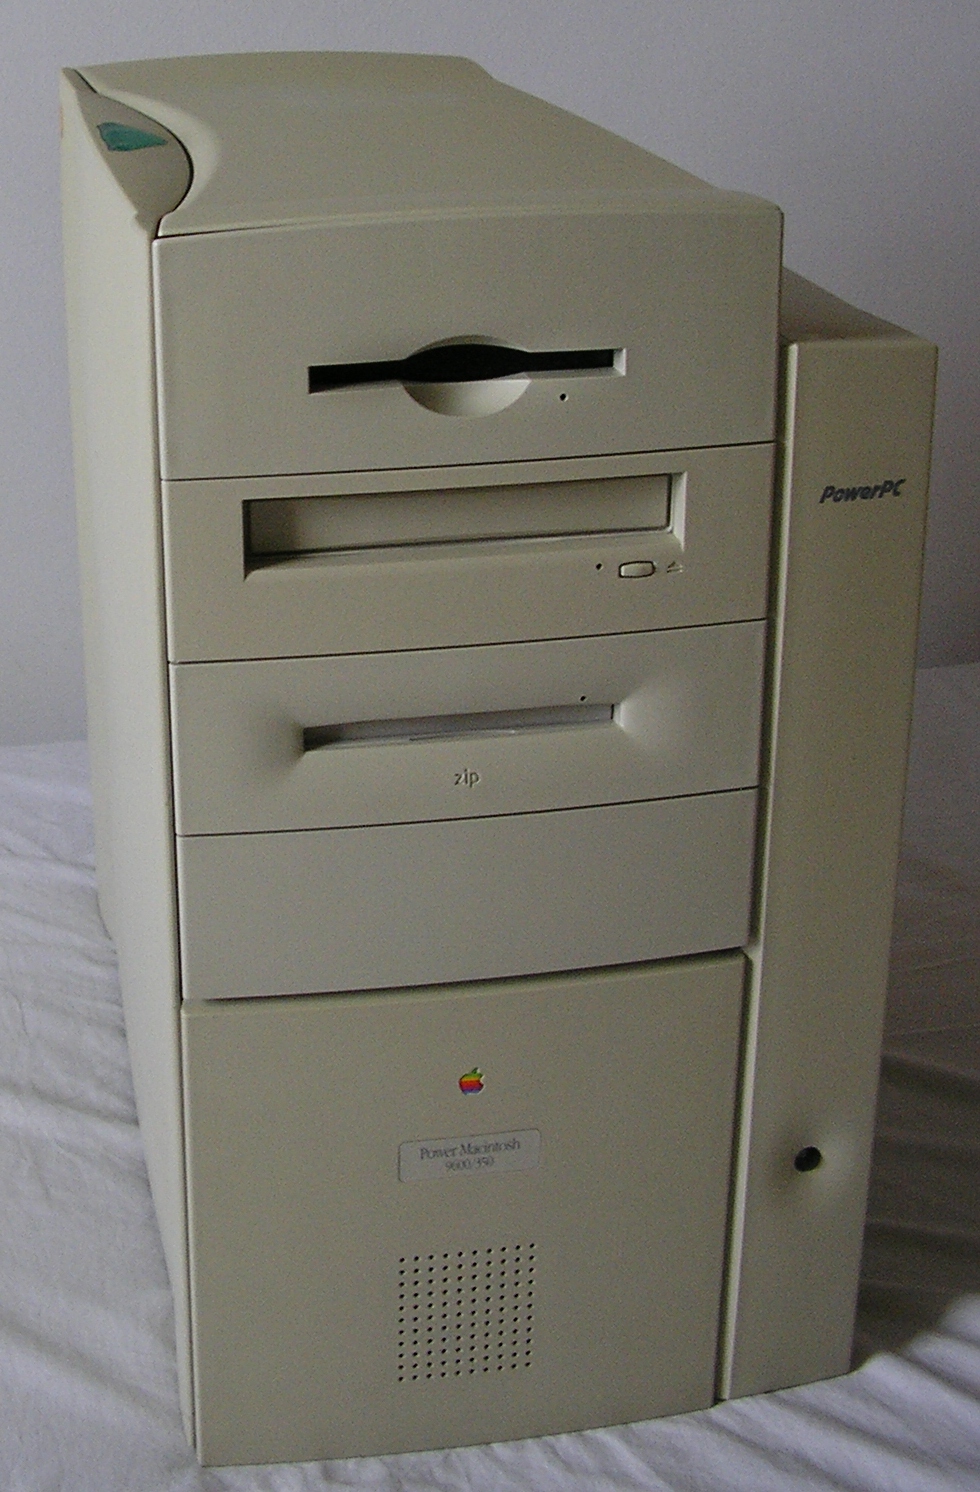 Software For Power Mac